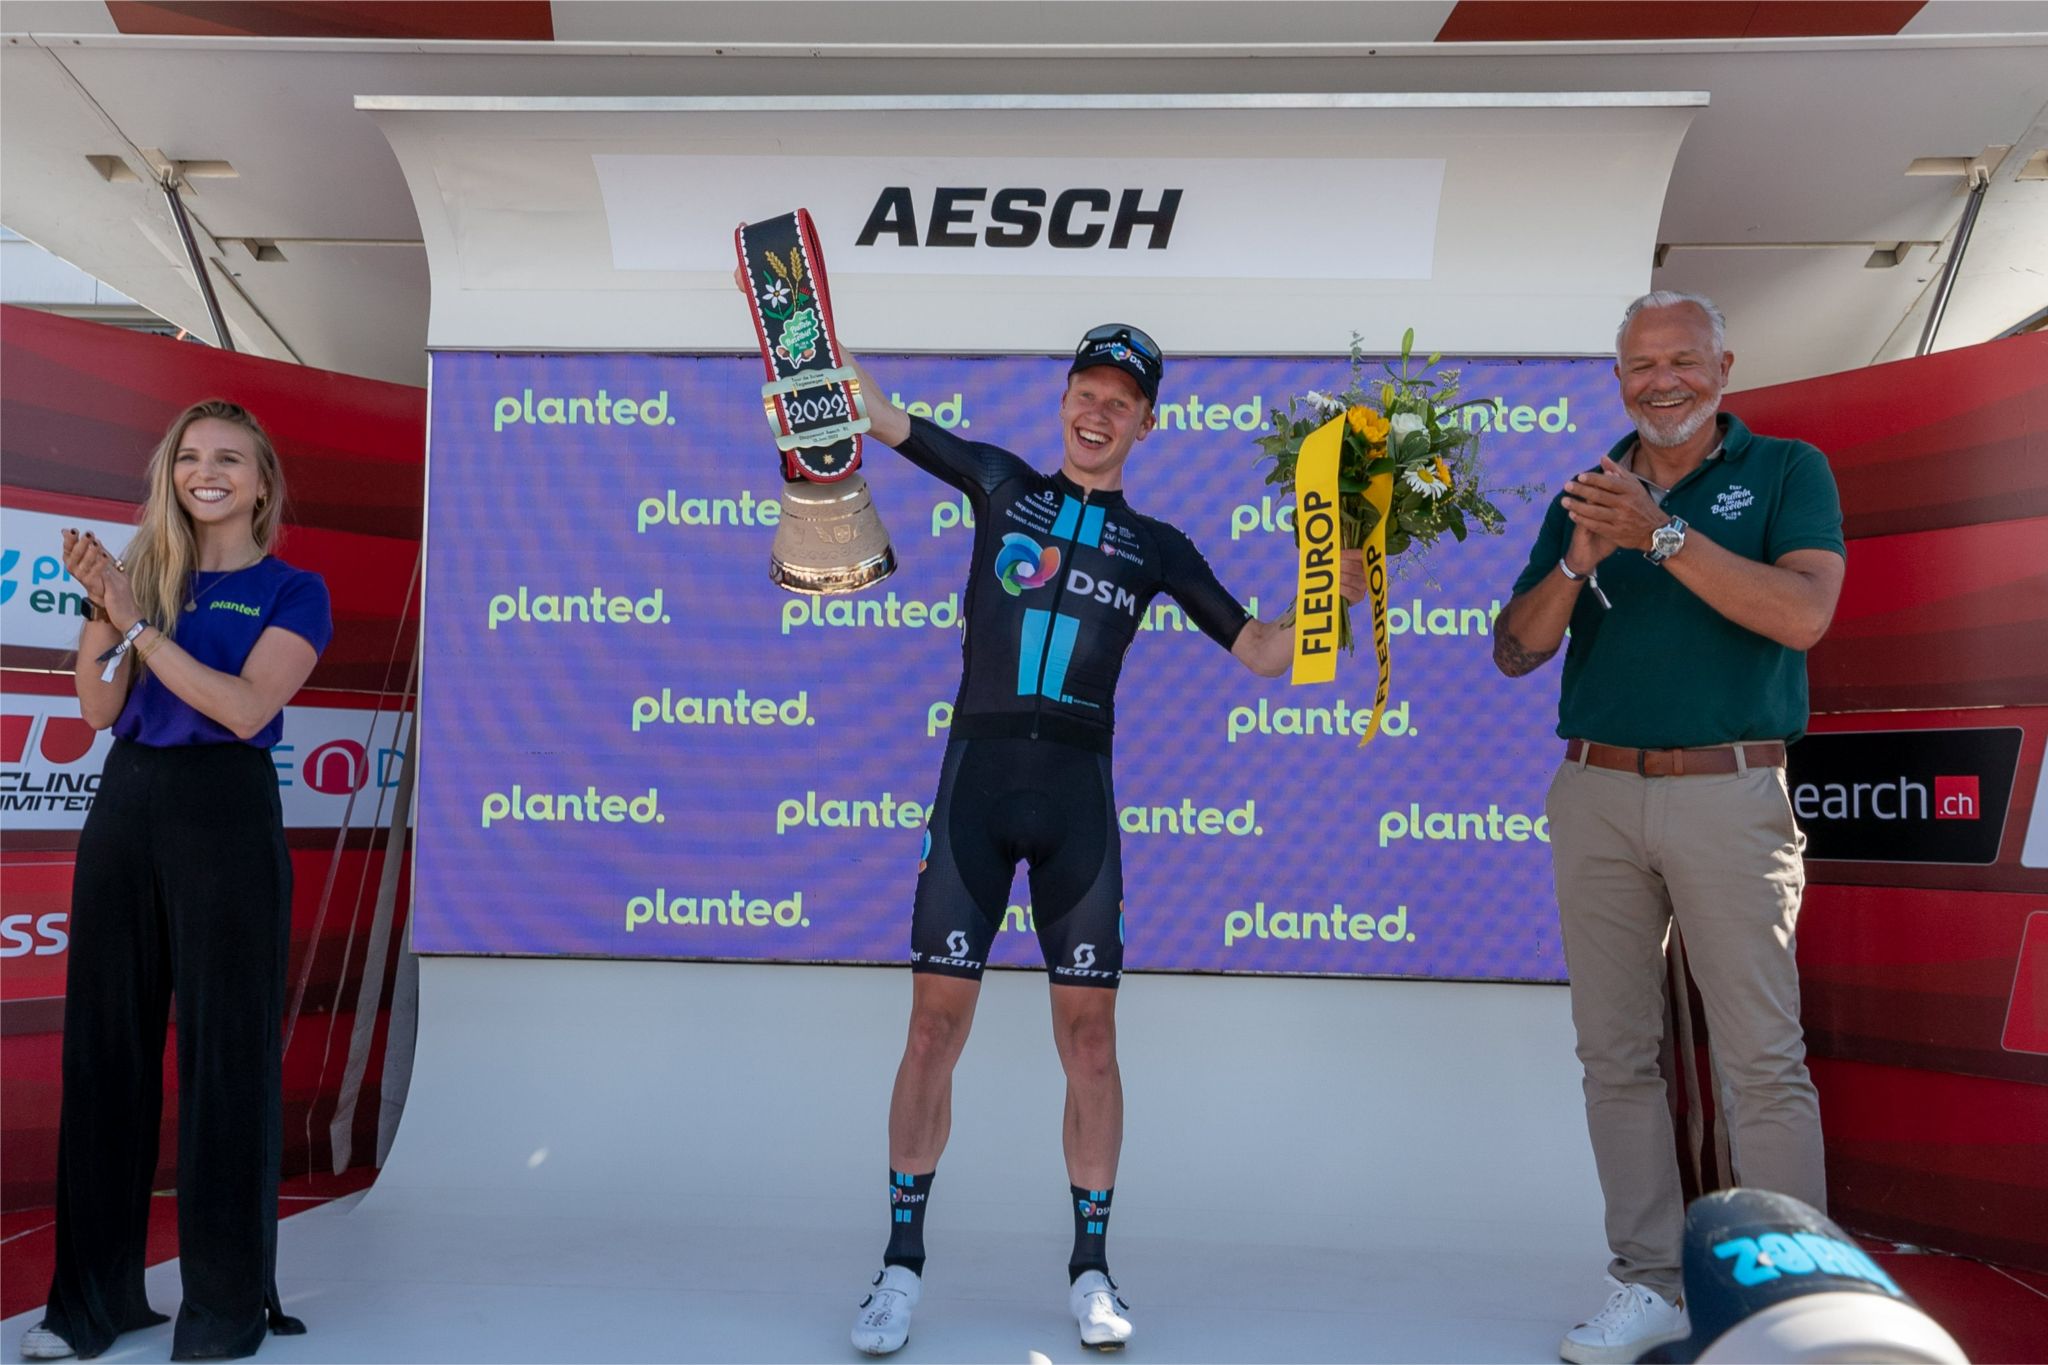 Planted is the official meat supplier of the Tour de Suisse